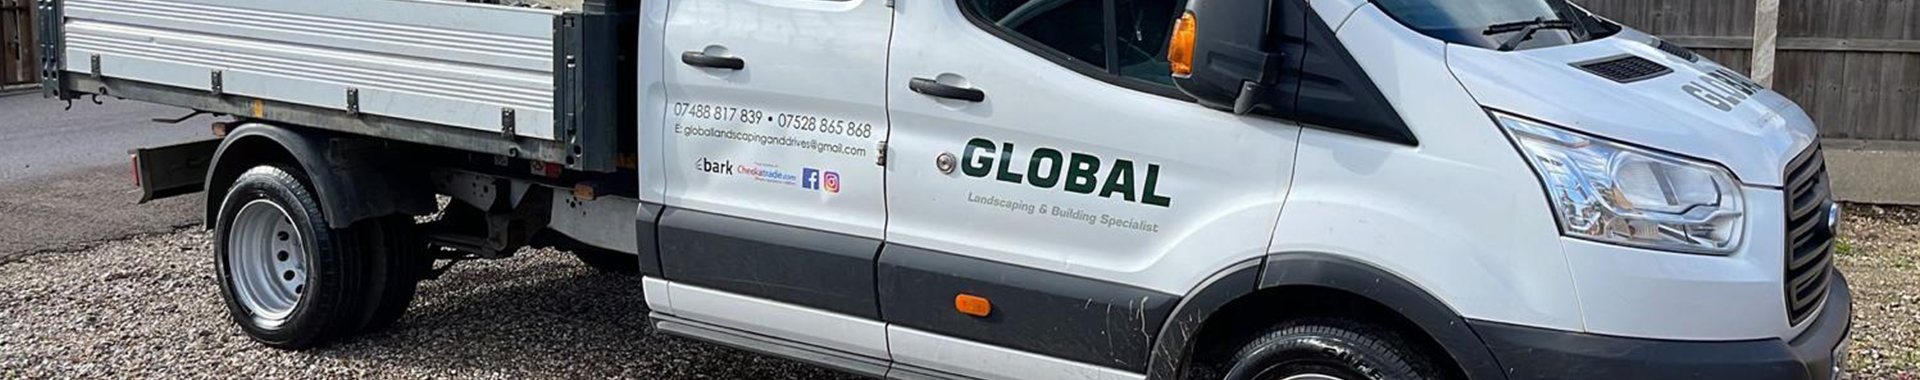 Global Landscaping and Drives